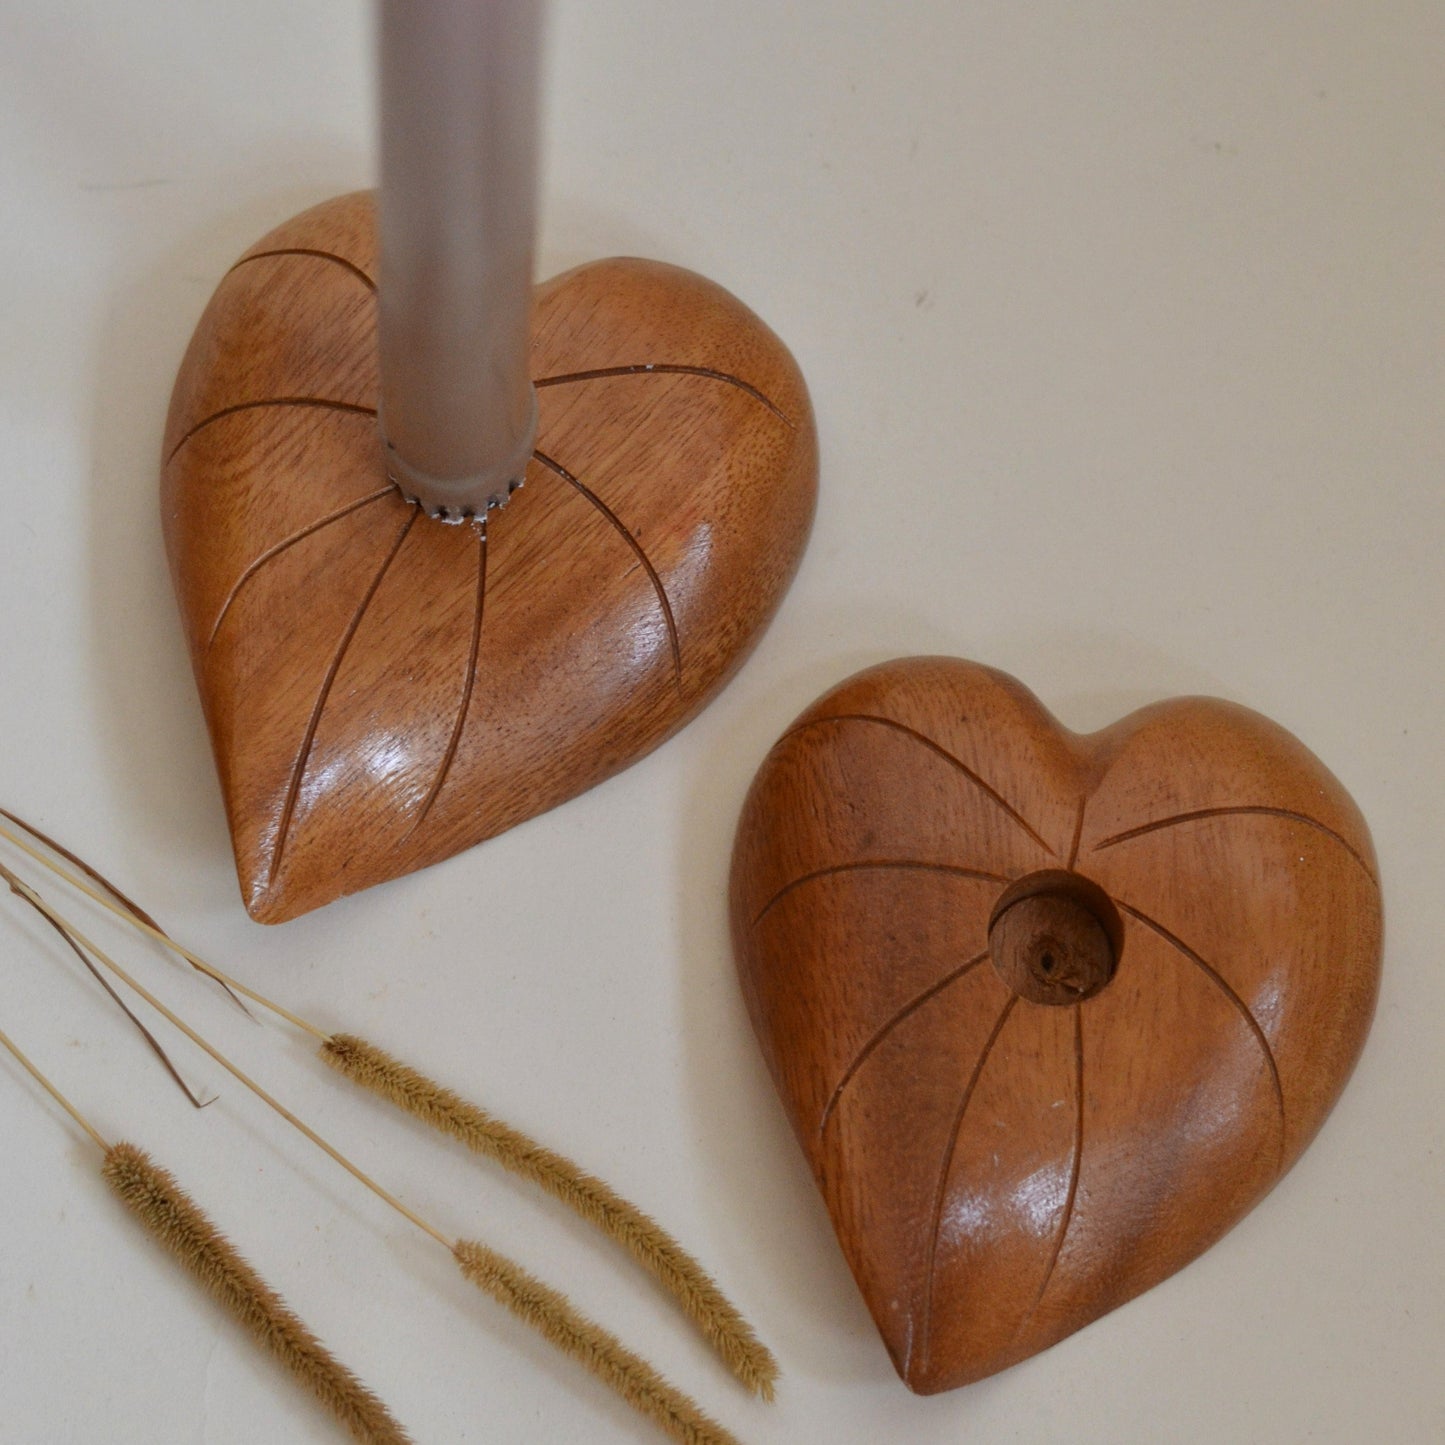 Pair of Wooden Heart Candlestick Holders from Hawaii